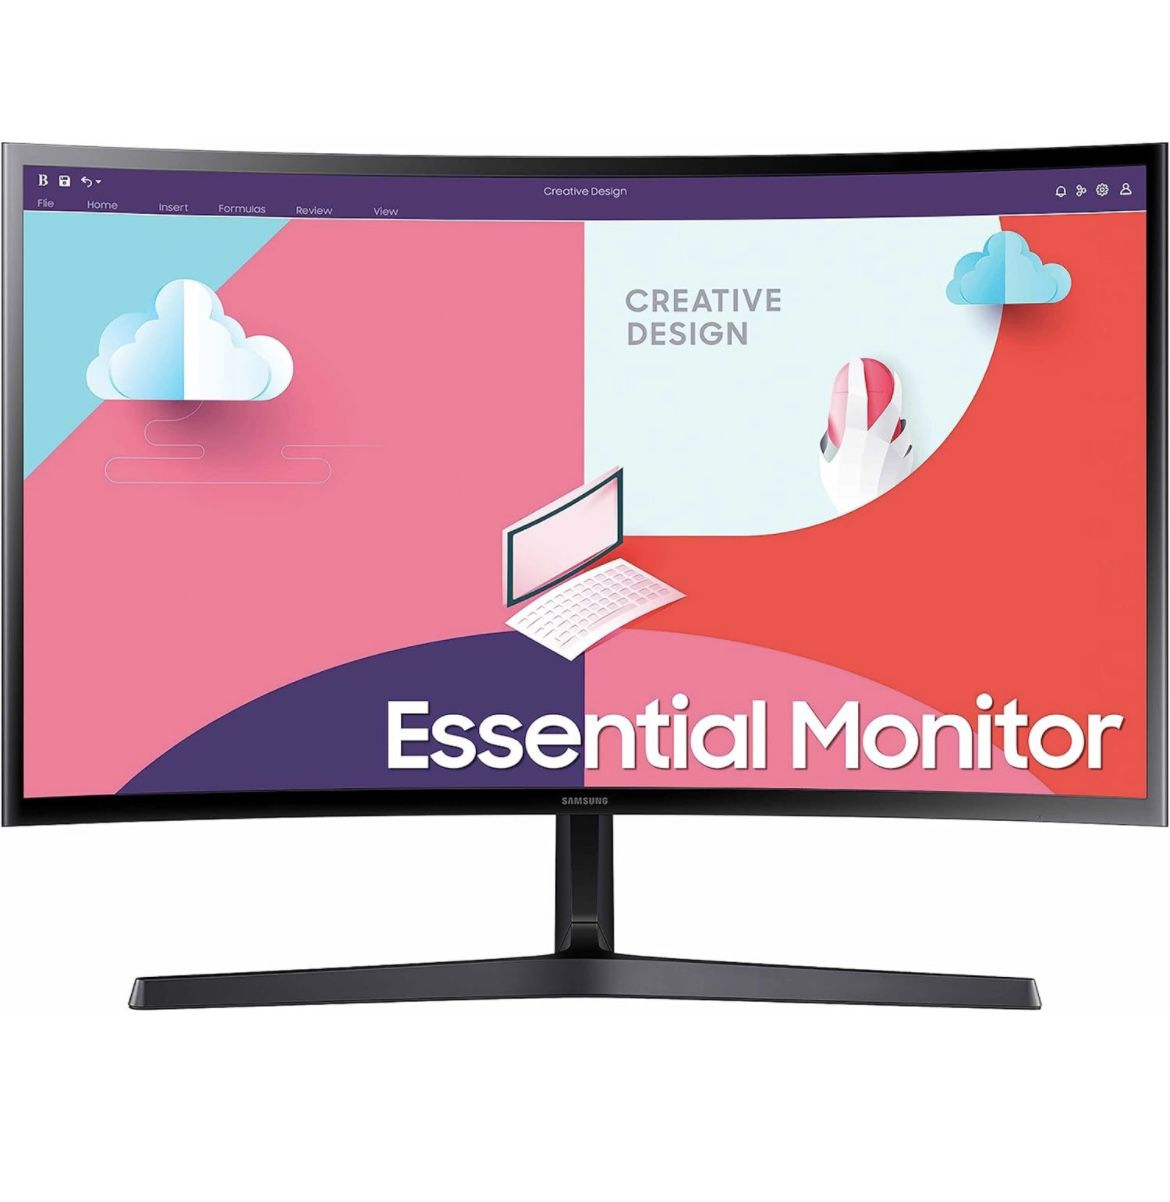 Samsung S36c 24 " 1920 X 1080 Pixels Full Hd Va Panel Hdmi Vga Curved Monitor  Open box item appears new.   Experience immersive viewing with this Sam